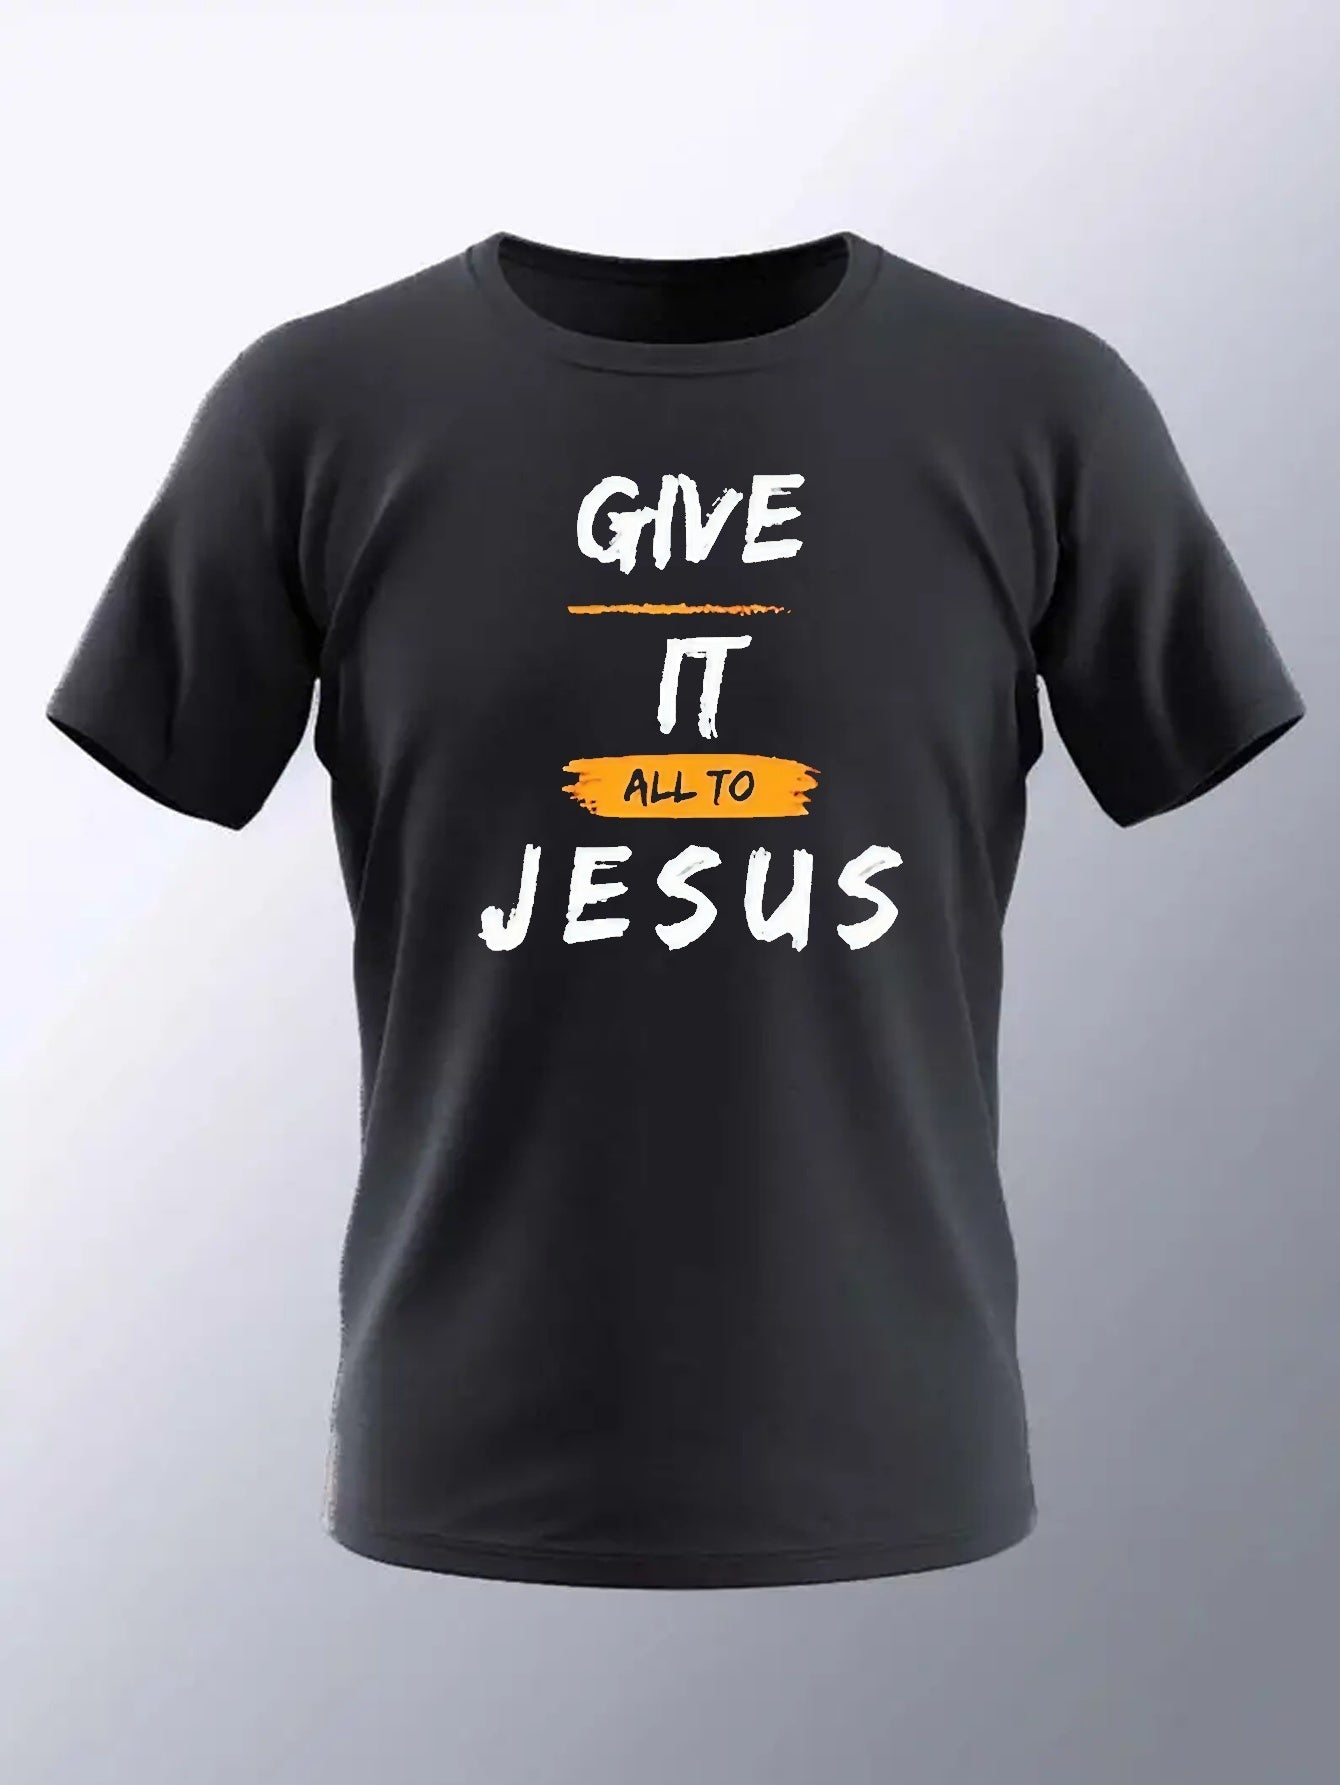 Give All To Jesus Men's Christian T-shirt claimedbygoddesigns